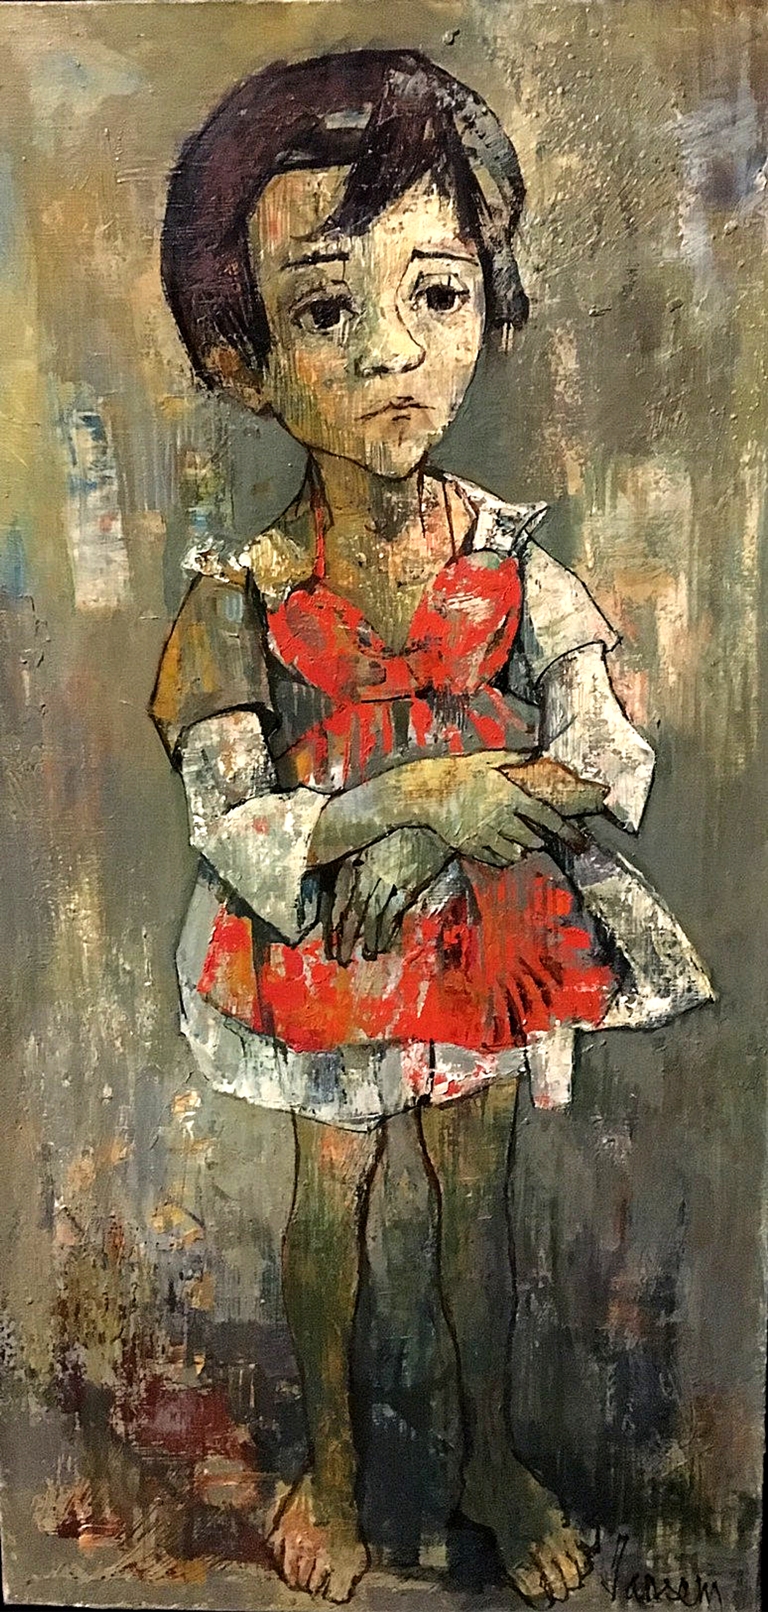 “The Girl With Red Apron”